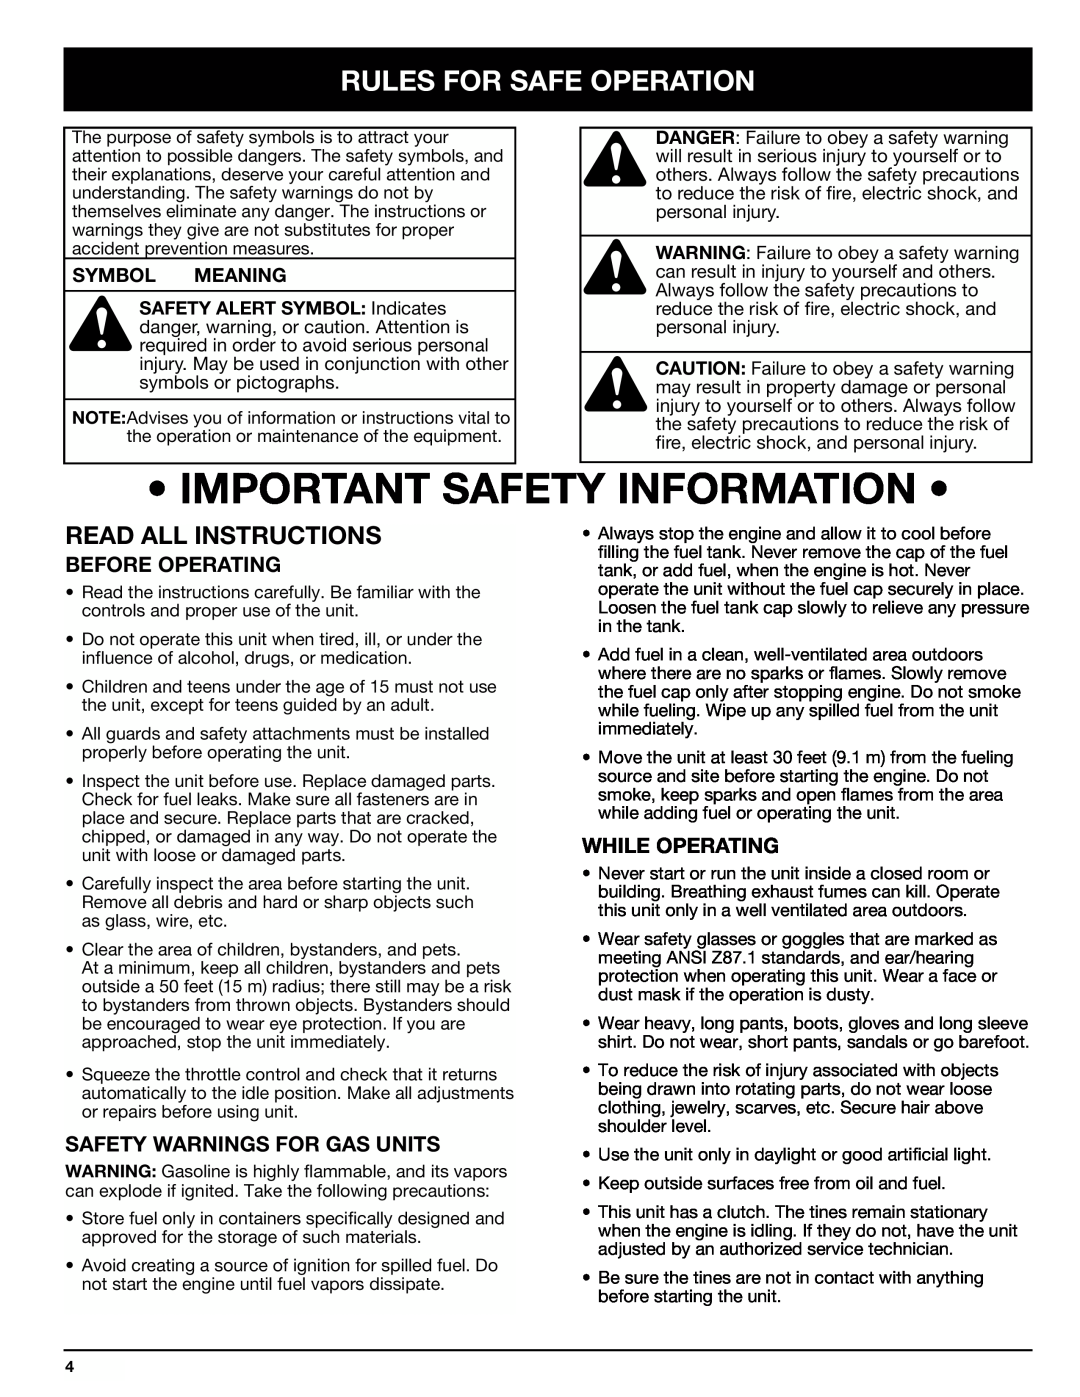 Ryobi Outdoor 510r Rules For Safe Operation, Read All Instructions, Before Operating, While Operating, Symbol Meaning 